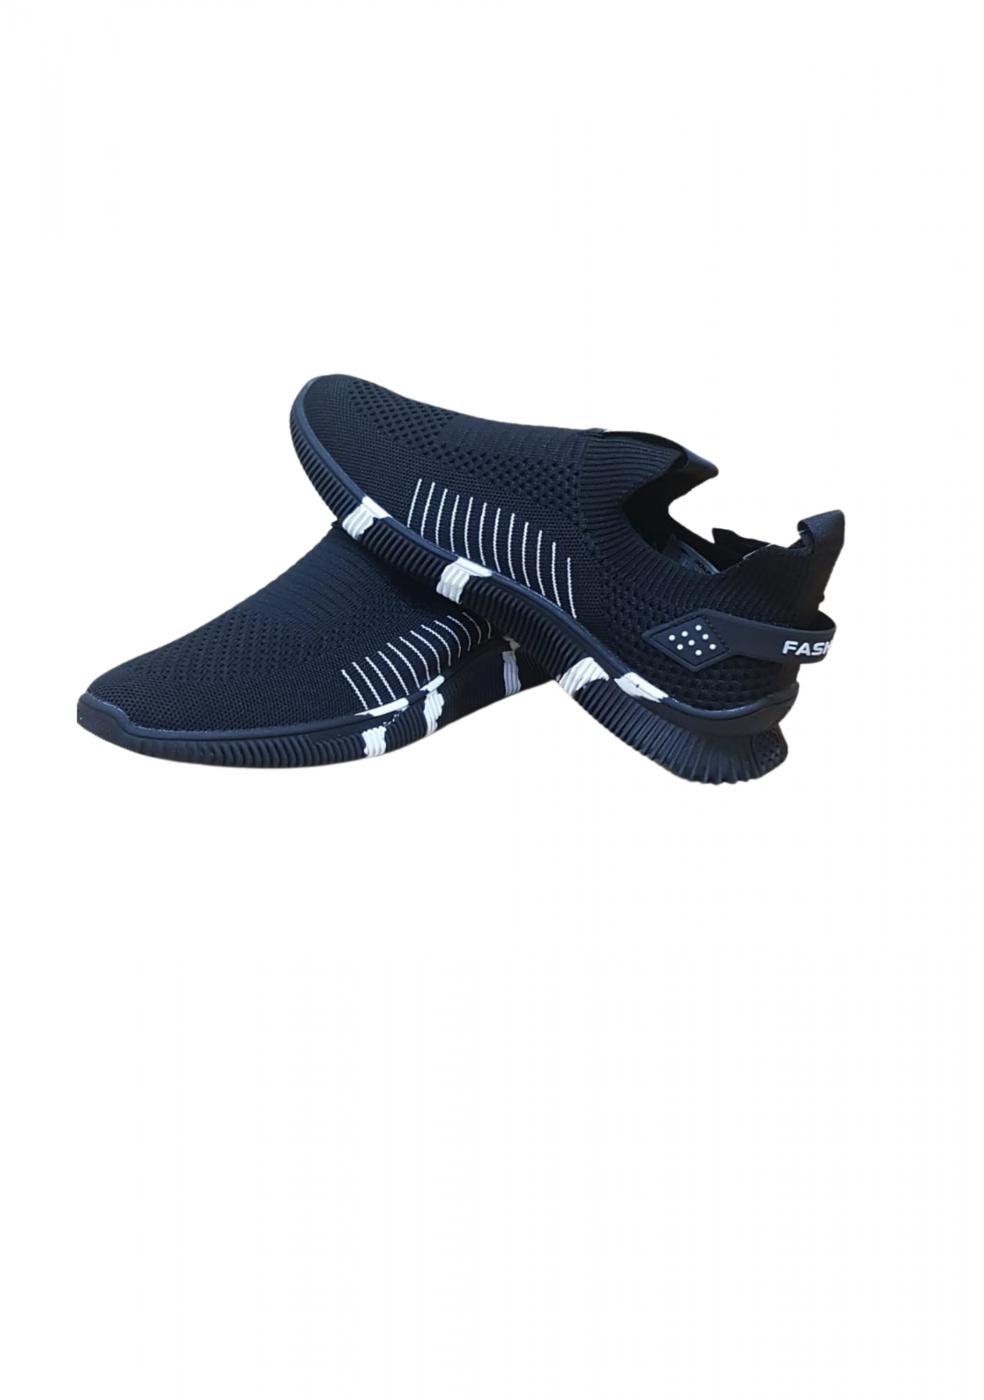 Black Sports Shoes Without lace For Men